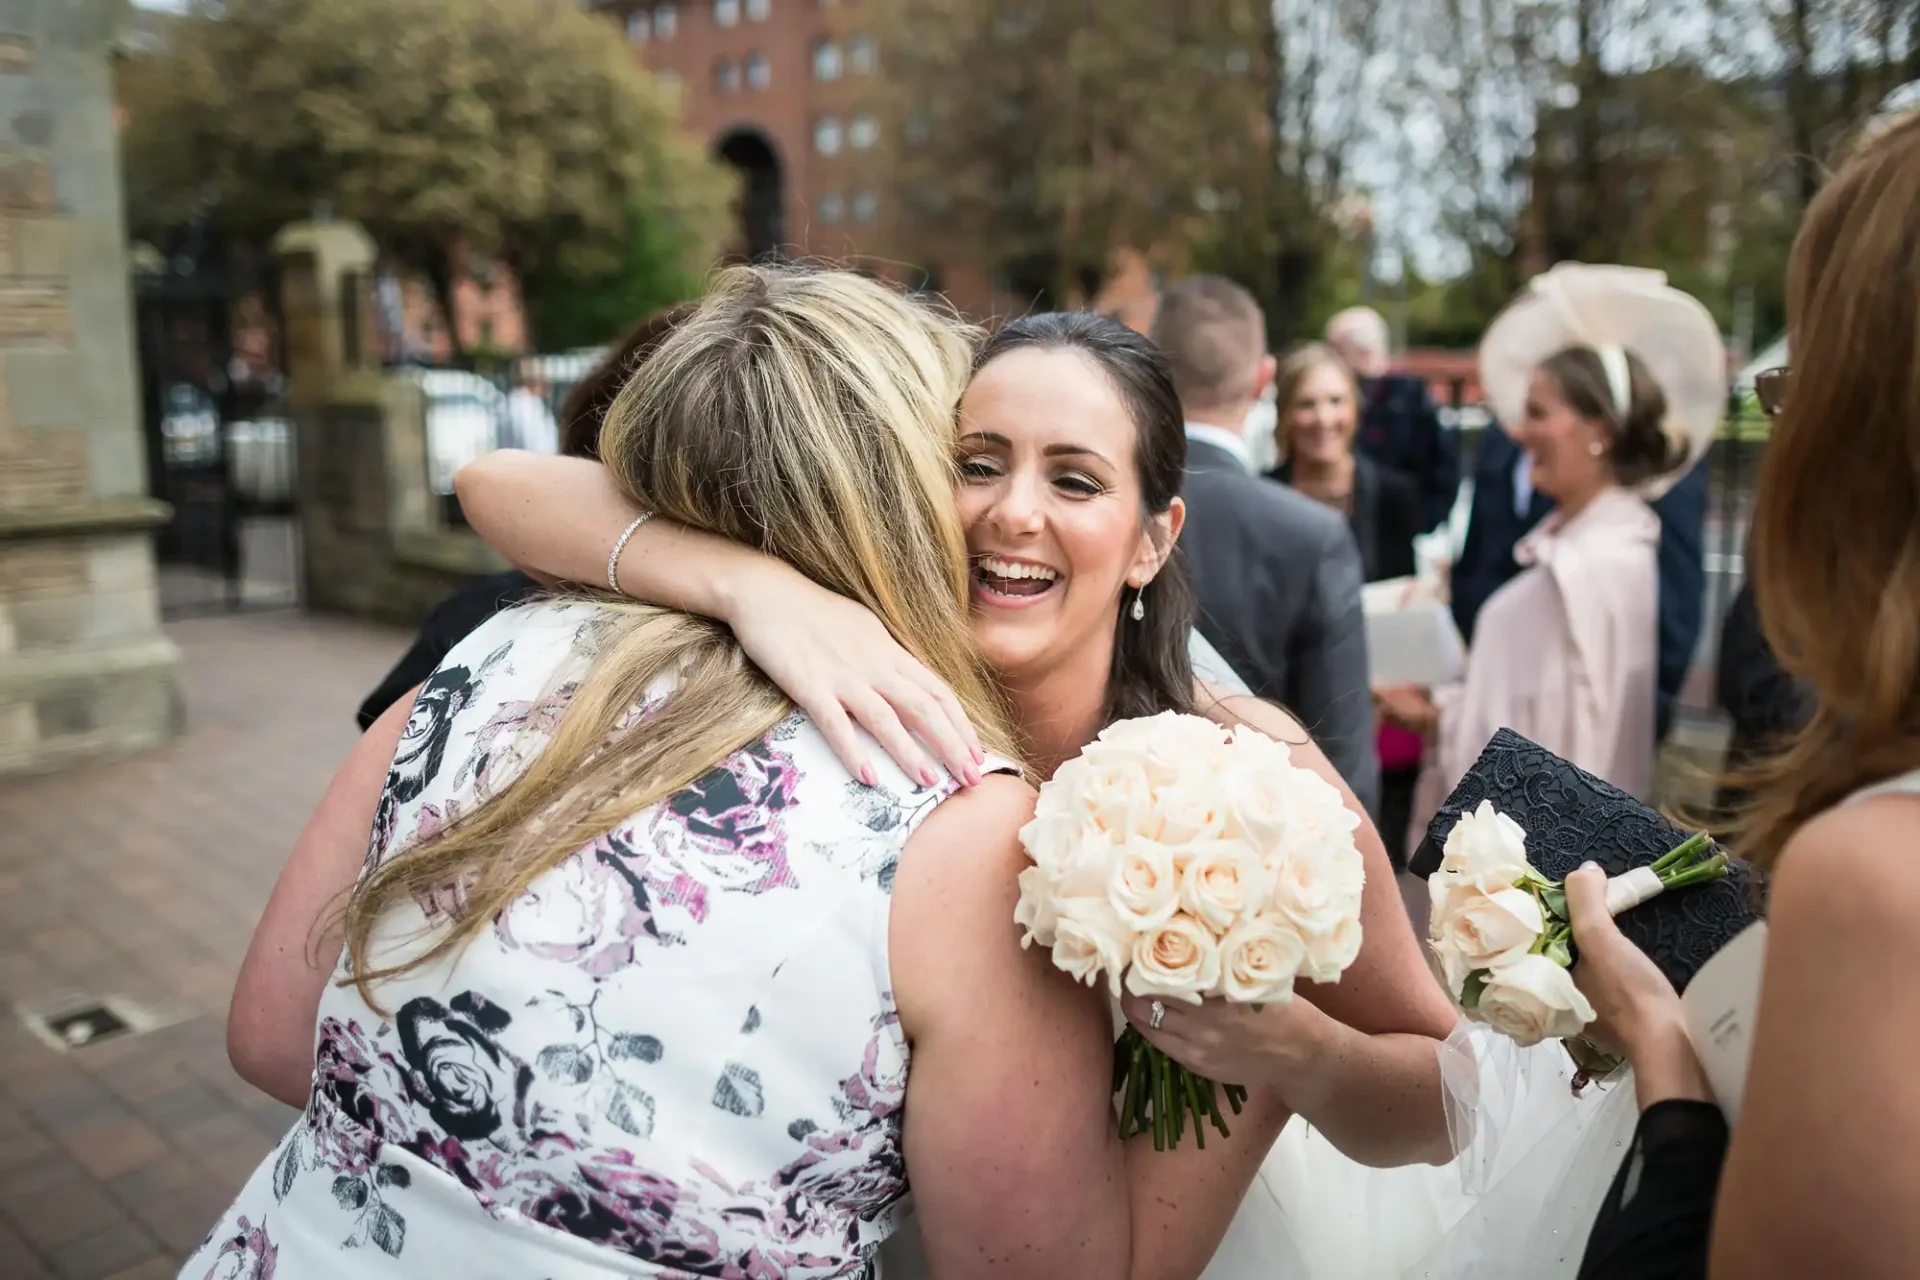 A bride with a bouquet of white roses hugging a woman in a floral dress at a wedding ceremony, with guests smiling in the background.